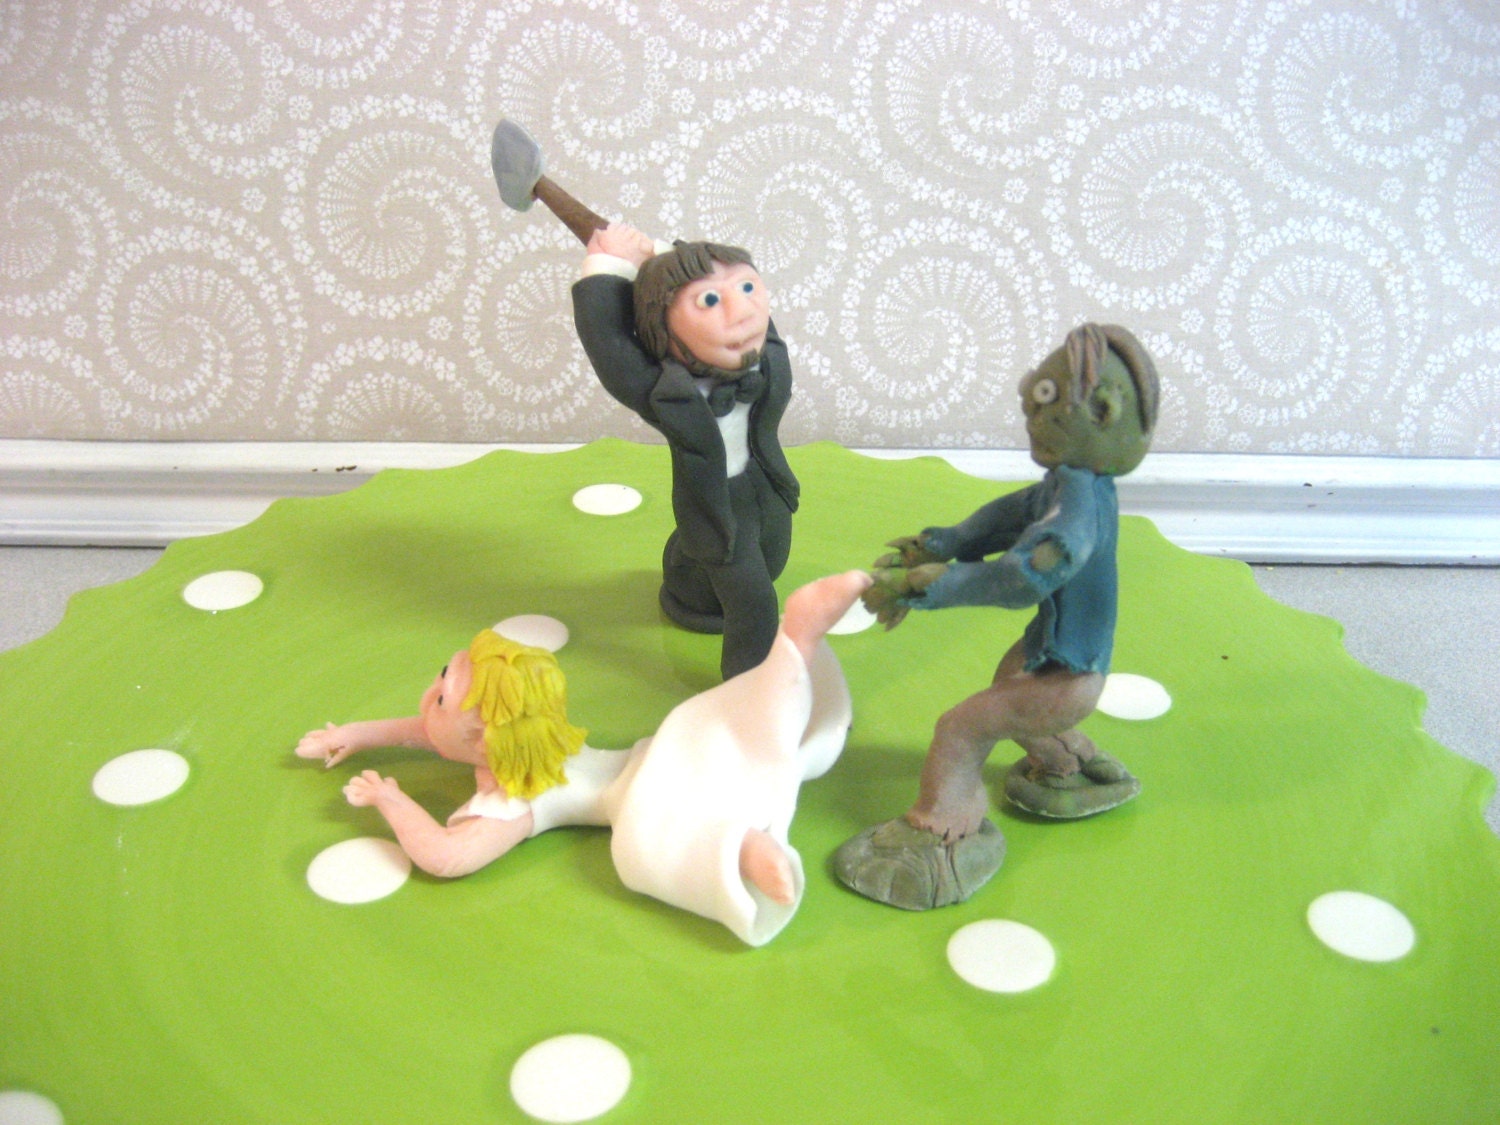  ZOMBIE  Wedding  Cake  Topper  Custom Zombies  Made to Order